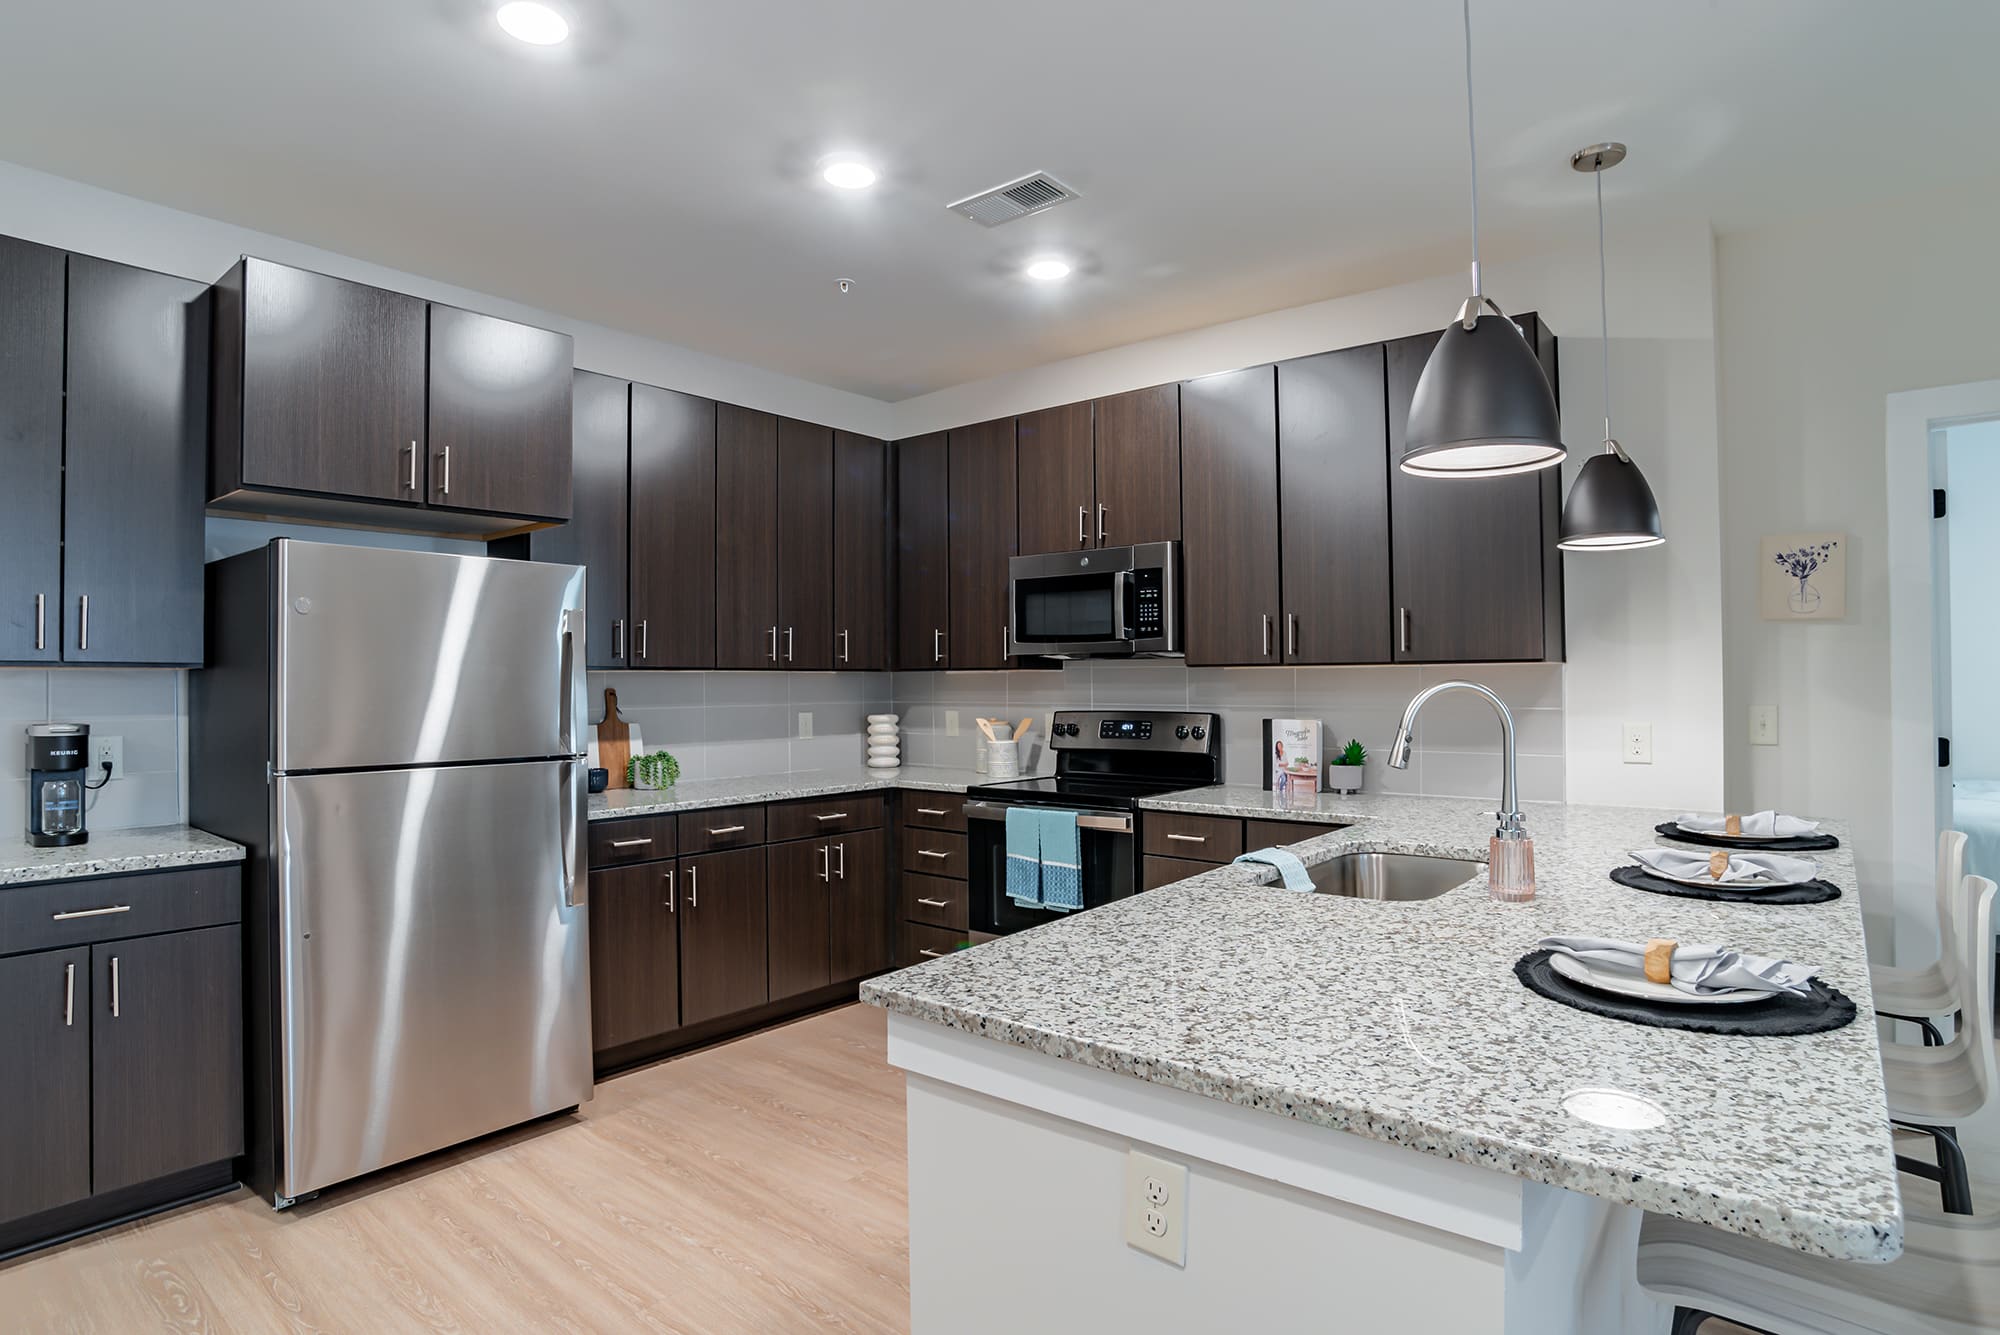 the edition on rosemary apartments near unc chapel hill kitchen stainless steel appliances